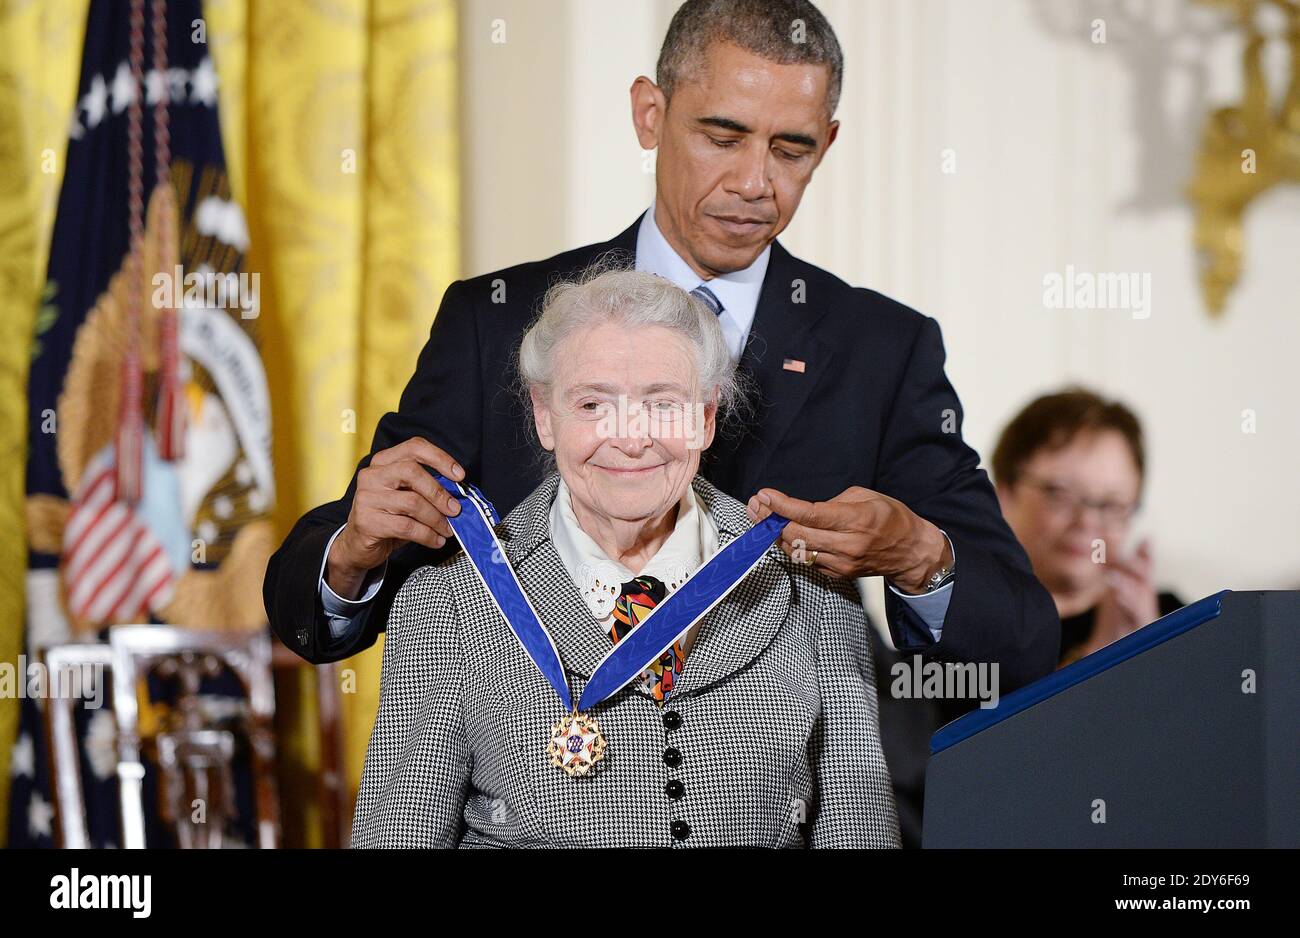 US President Barack Obama presents the Medal of Freedom to physicists  Mildred Dresselhaus during a ceremony in the East Room of the White House  in Washington, DC, USA, on November 24, 2014.